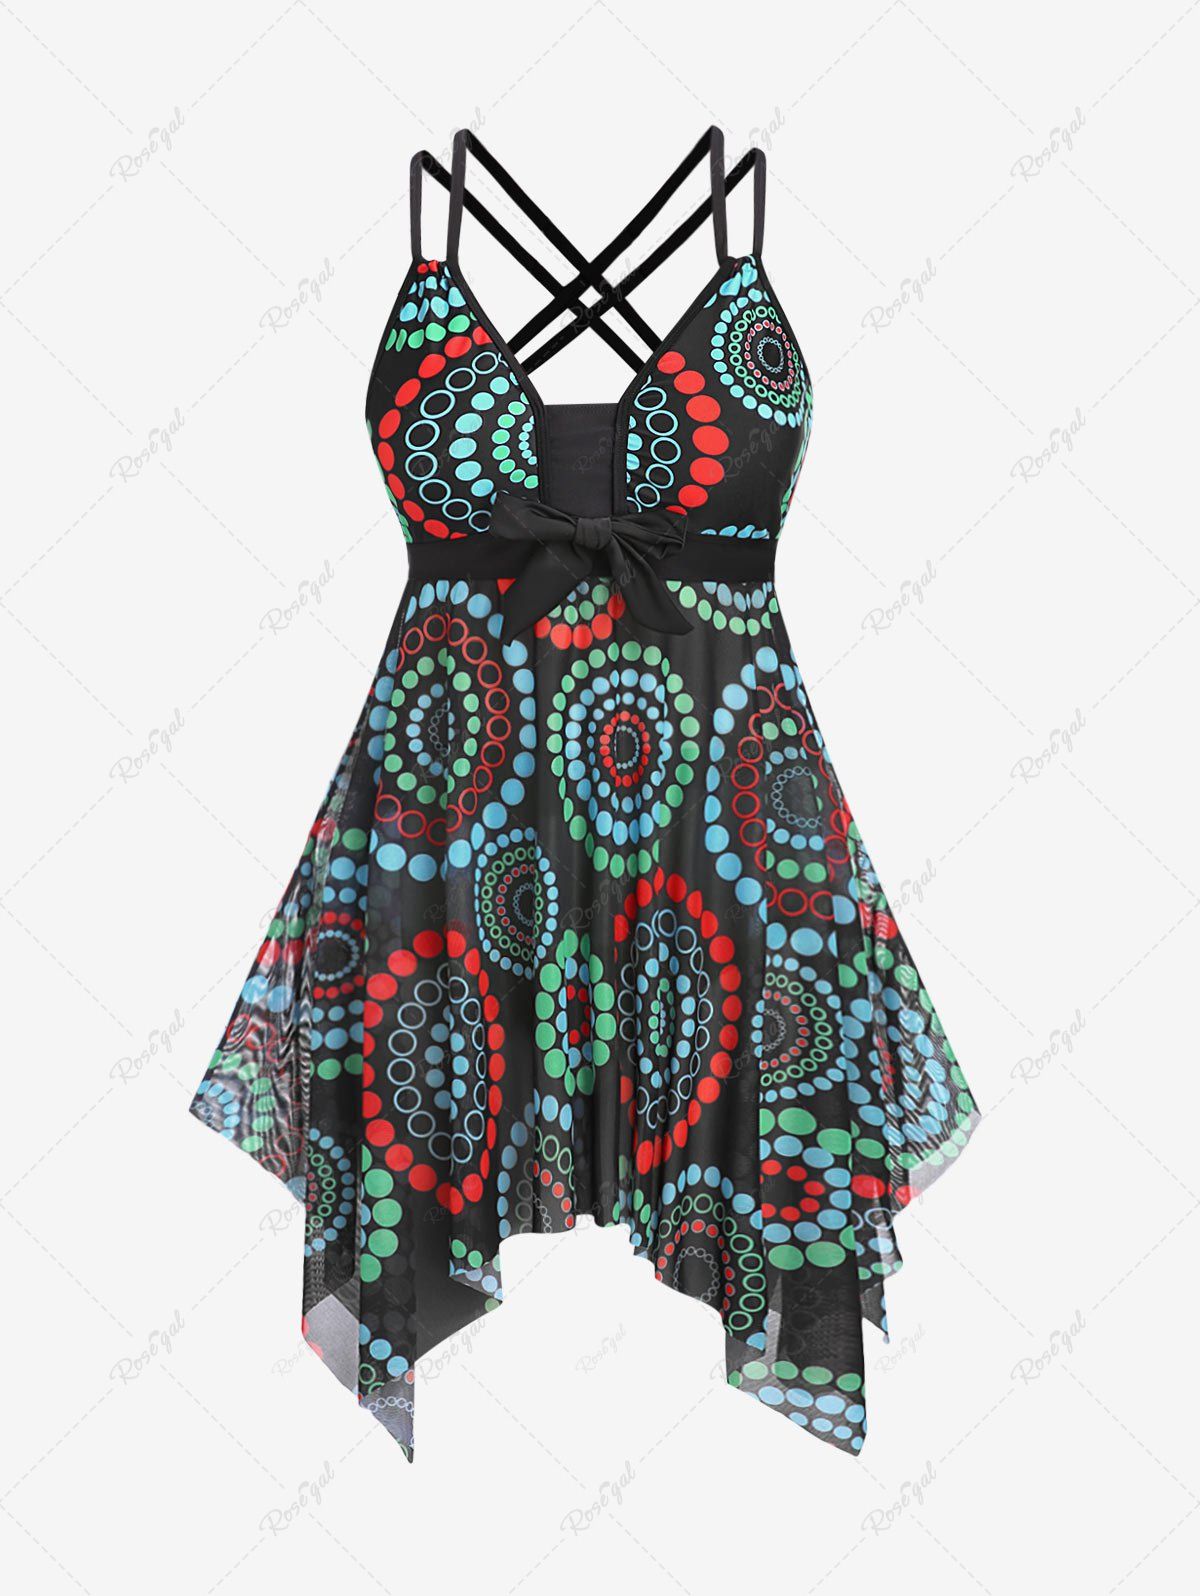 Discount Plus Size Polka Dot Printed Strappy Padded Bowkont Handkerchief Tankini Top  